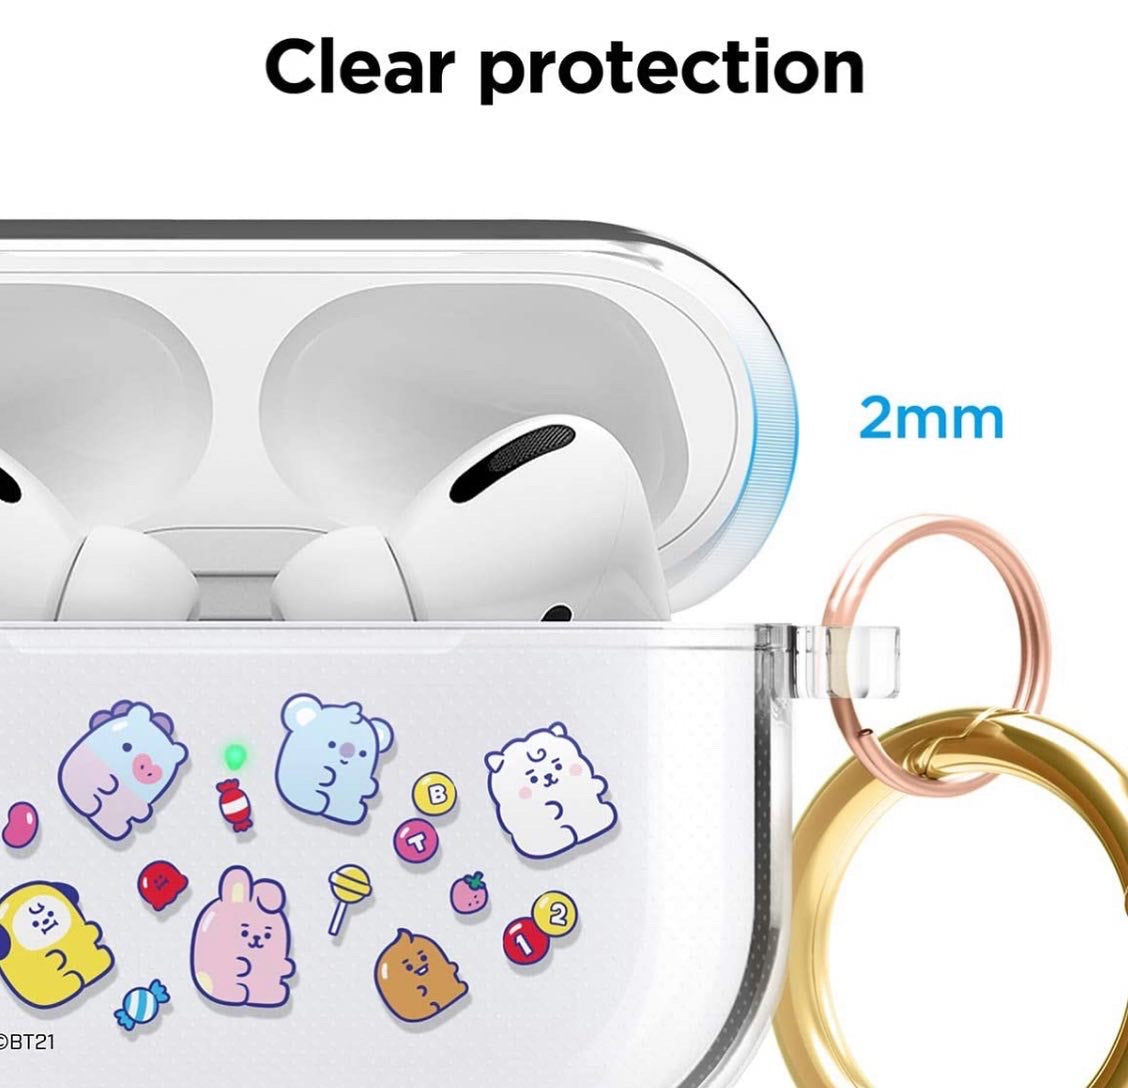 elago BT21 Case Compatible with Apple AirPods Pro Case, Clear Case with Keychain, Reduce Yellowing and Smudging, Supports Wireless Charging [Official Merchandise]